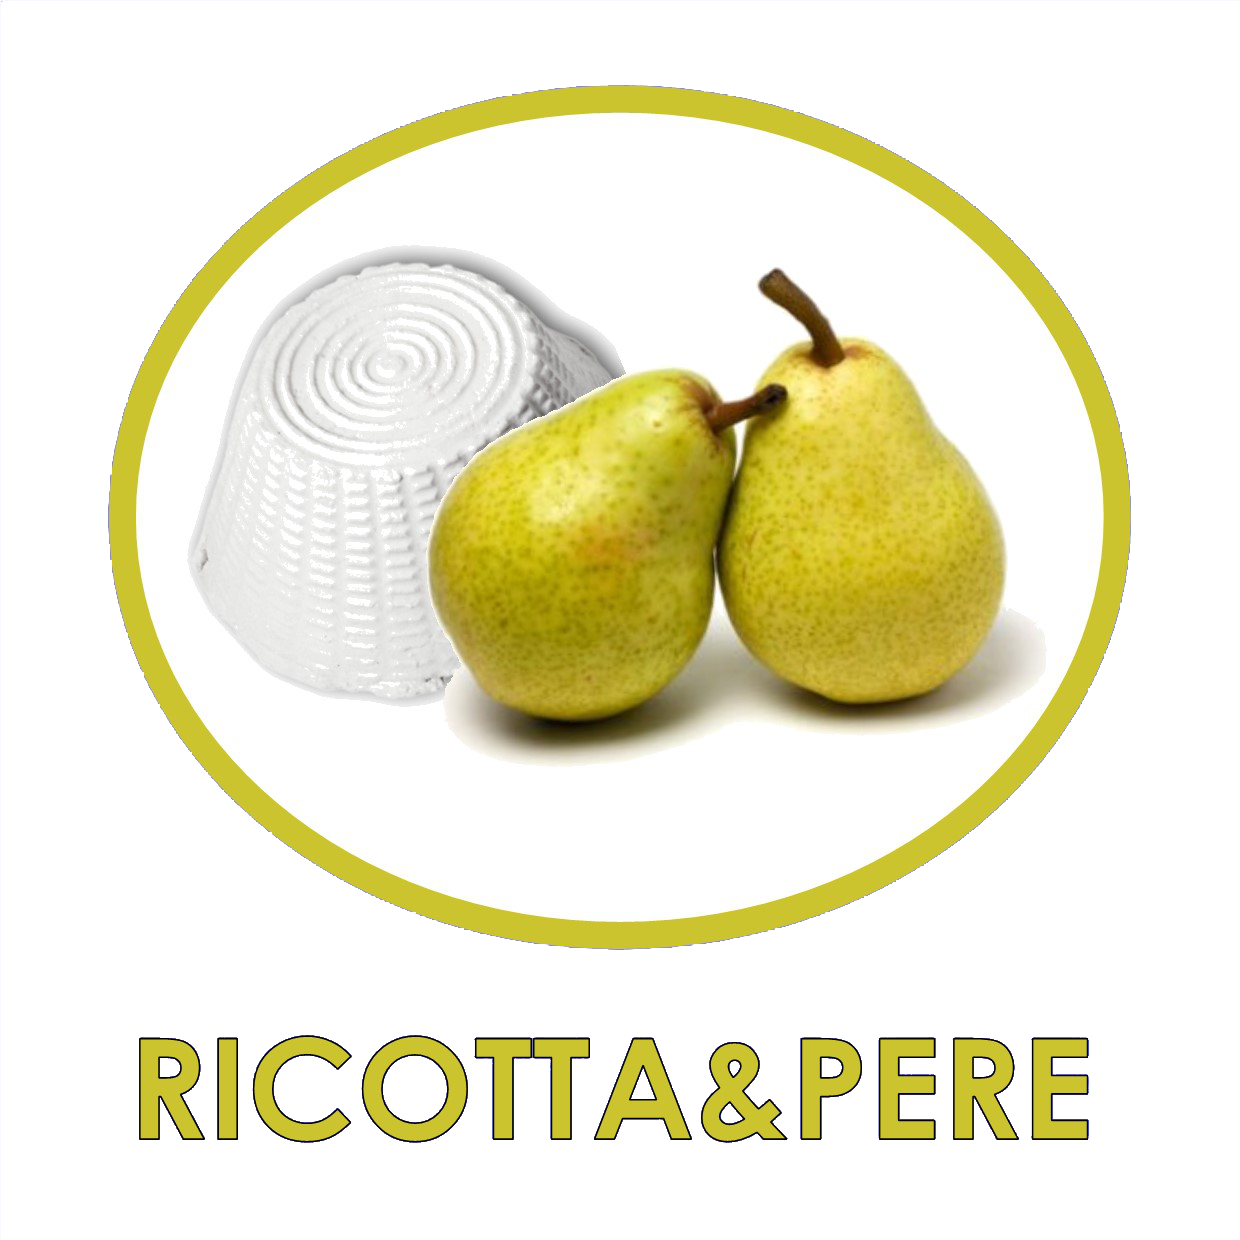 RICOTTAEPERE.png